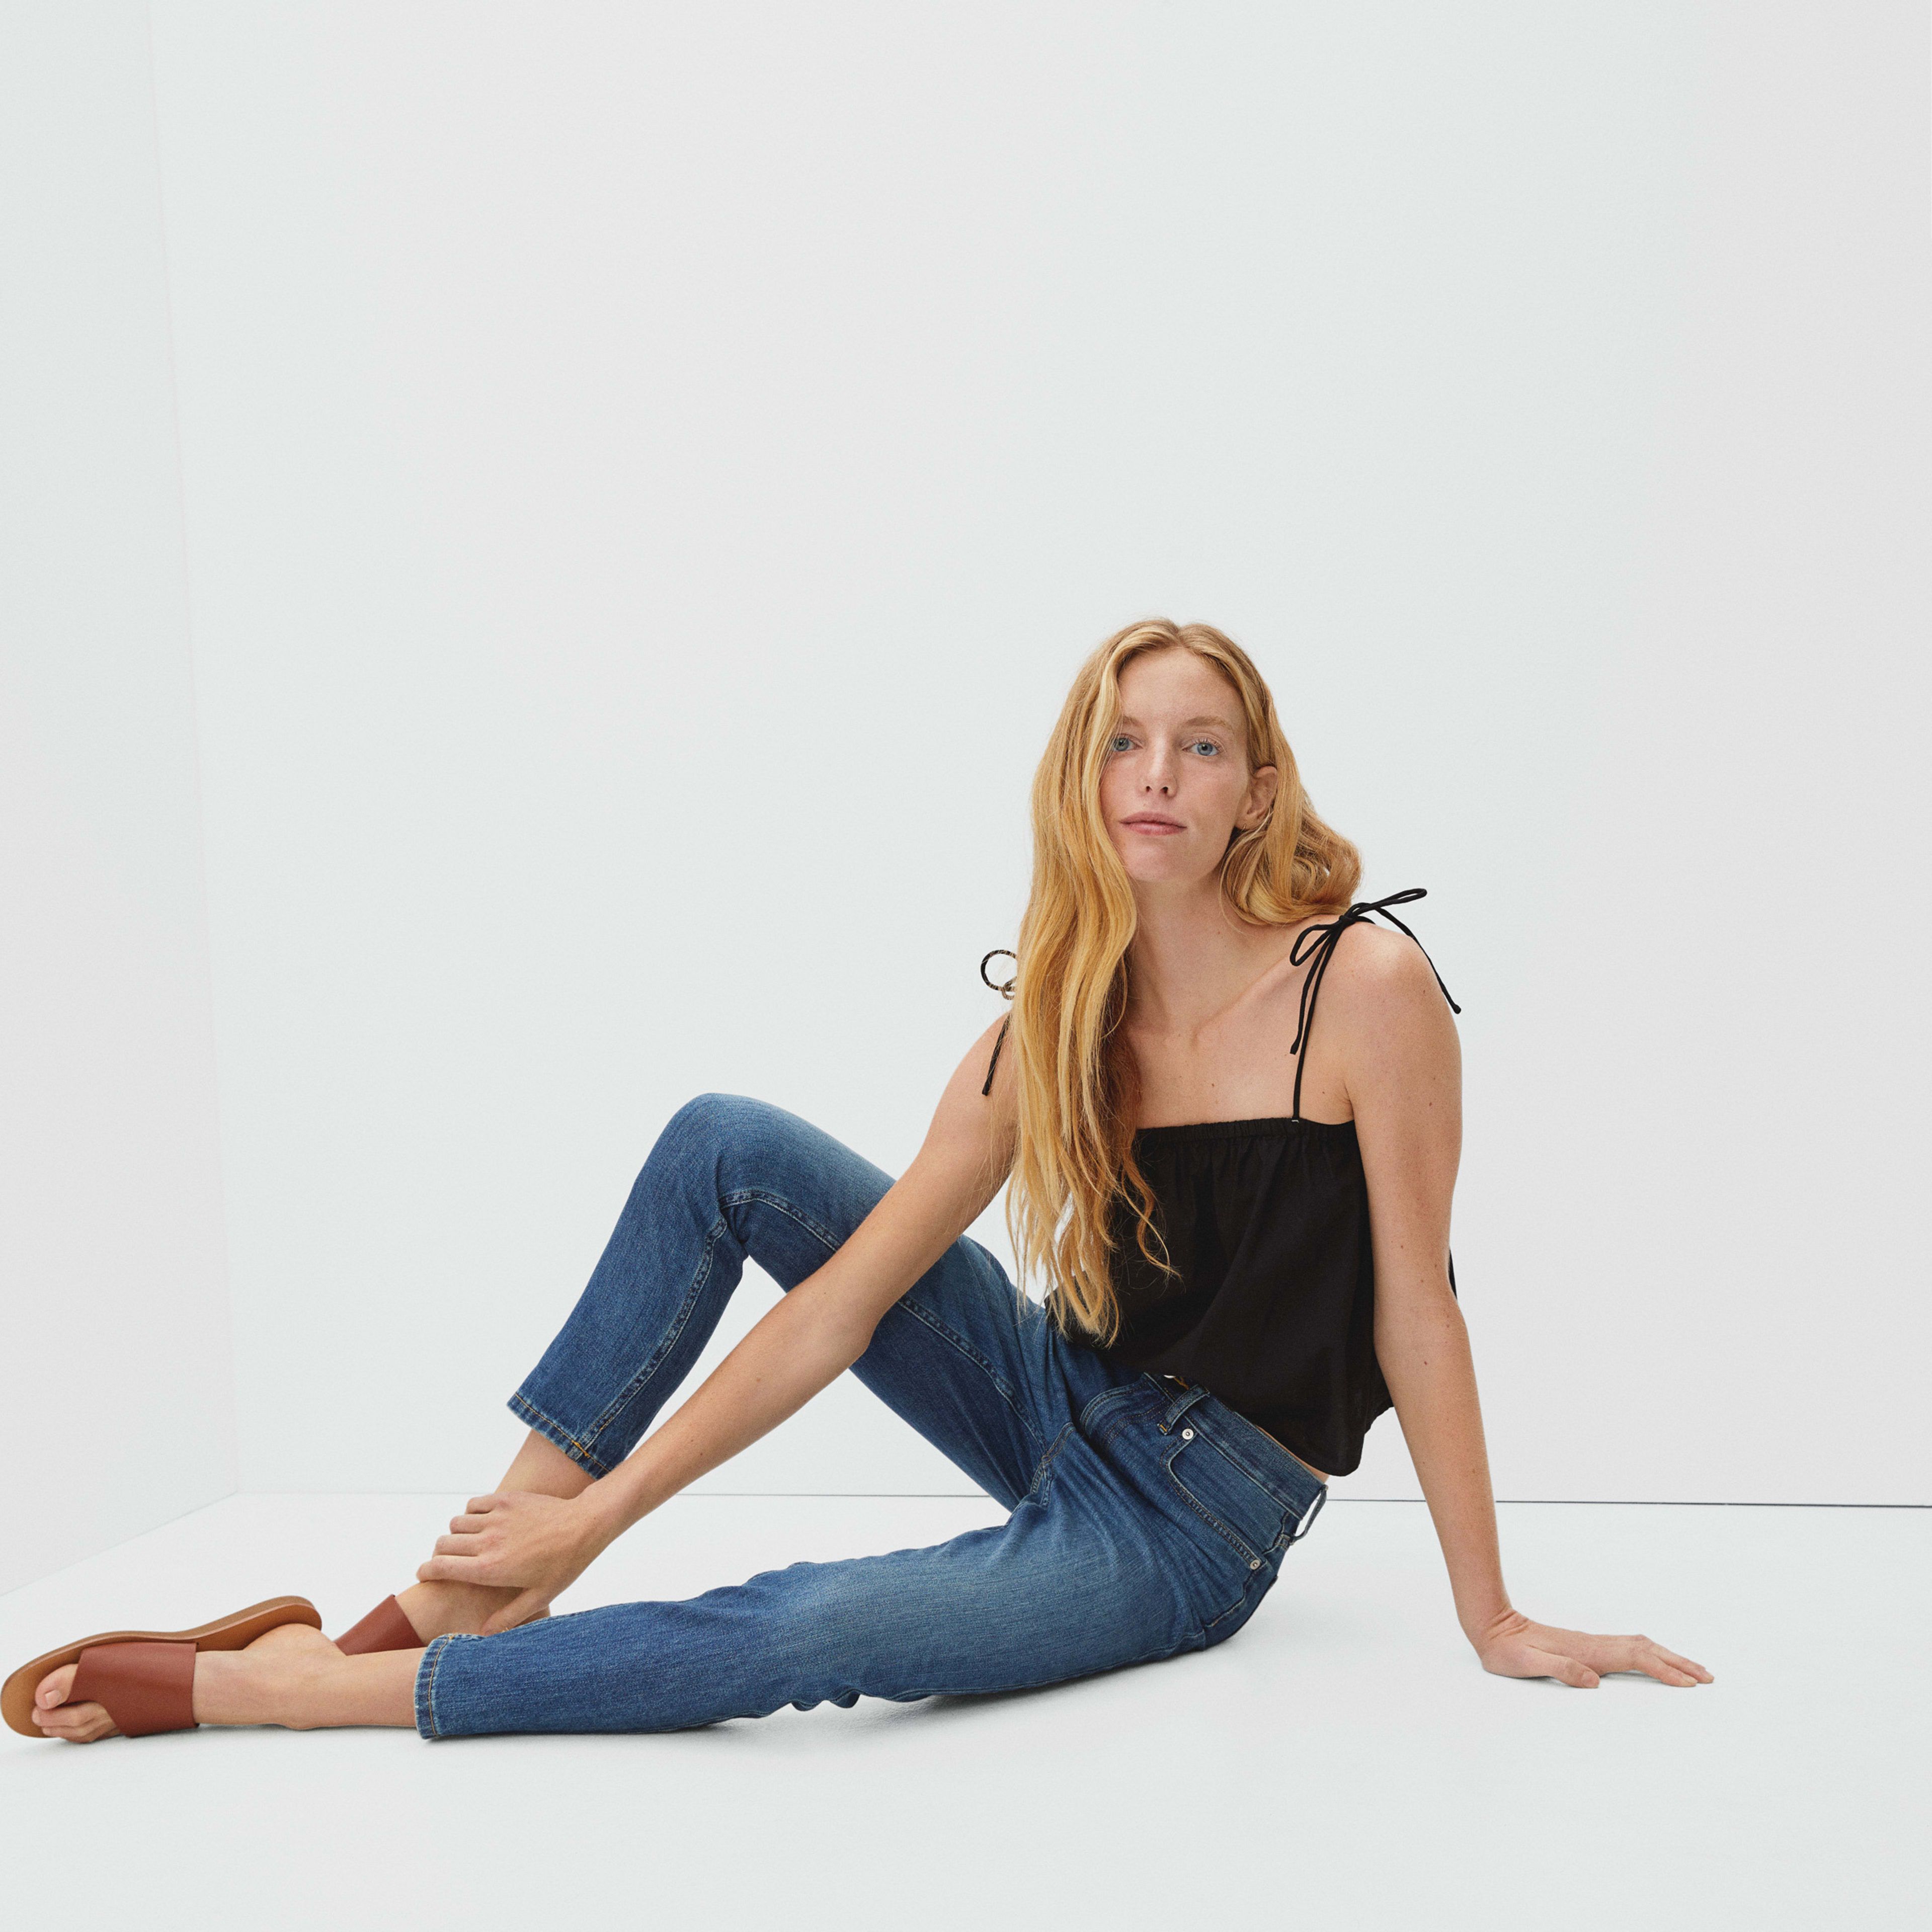 The Super-Soft Relaxed Jean | Everlane